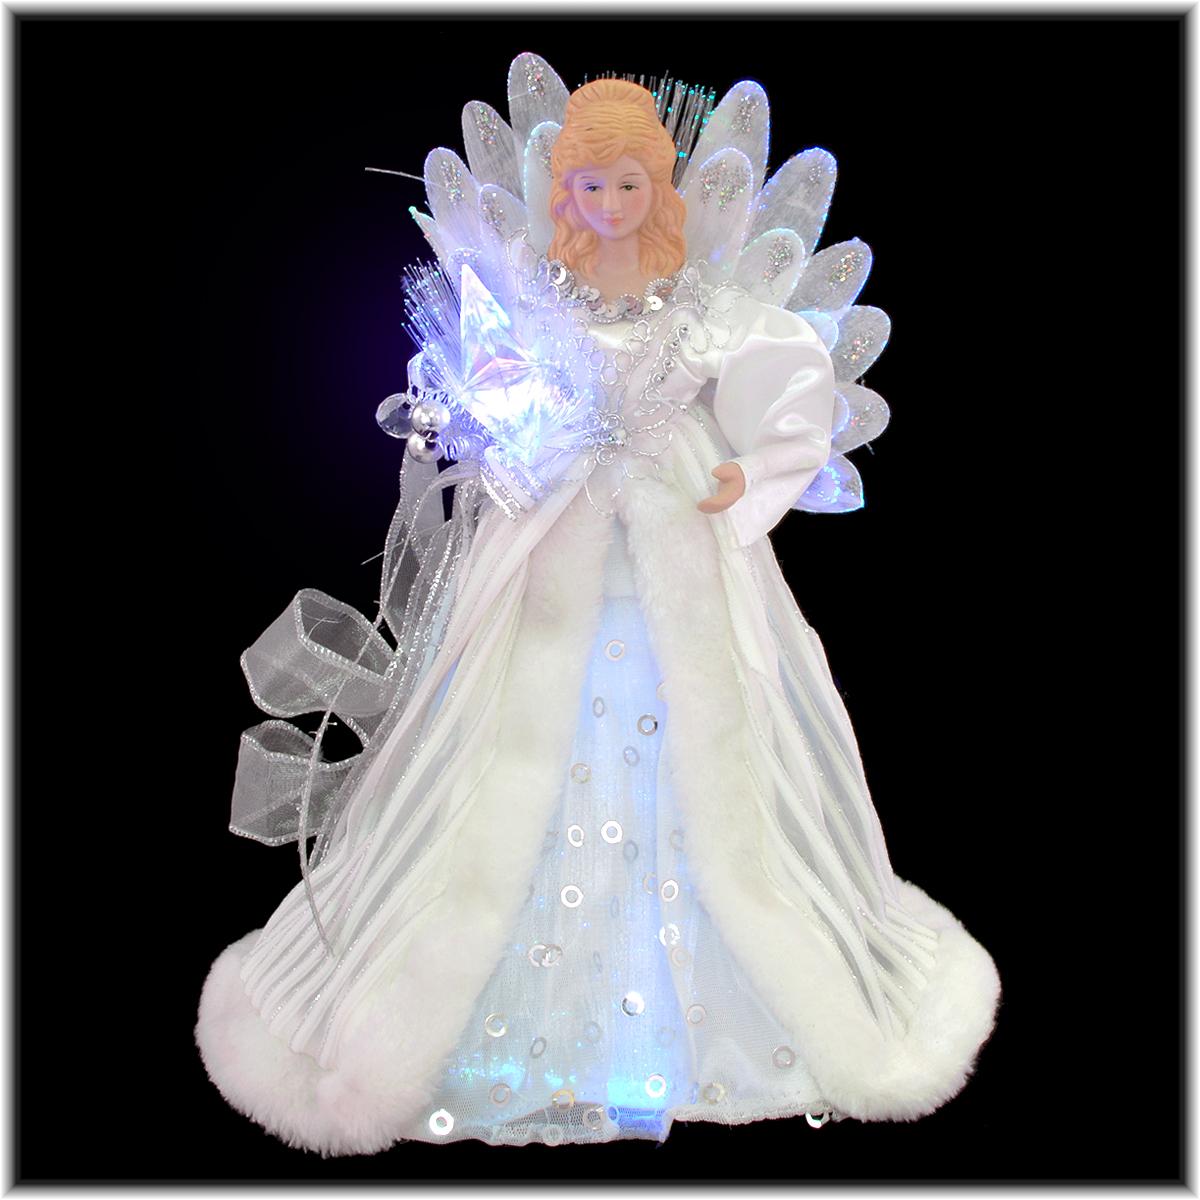 Alpine Angel Tree Topper with Fiber Optic Wings and LED Light